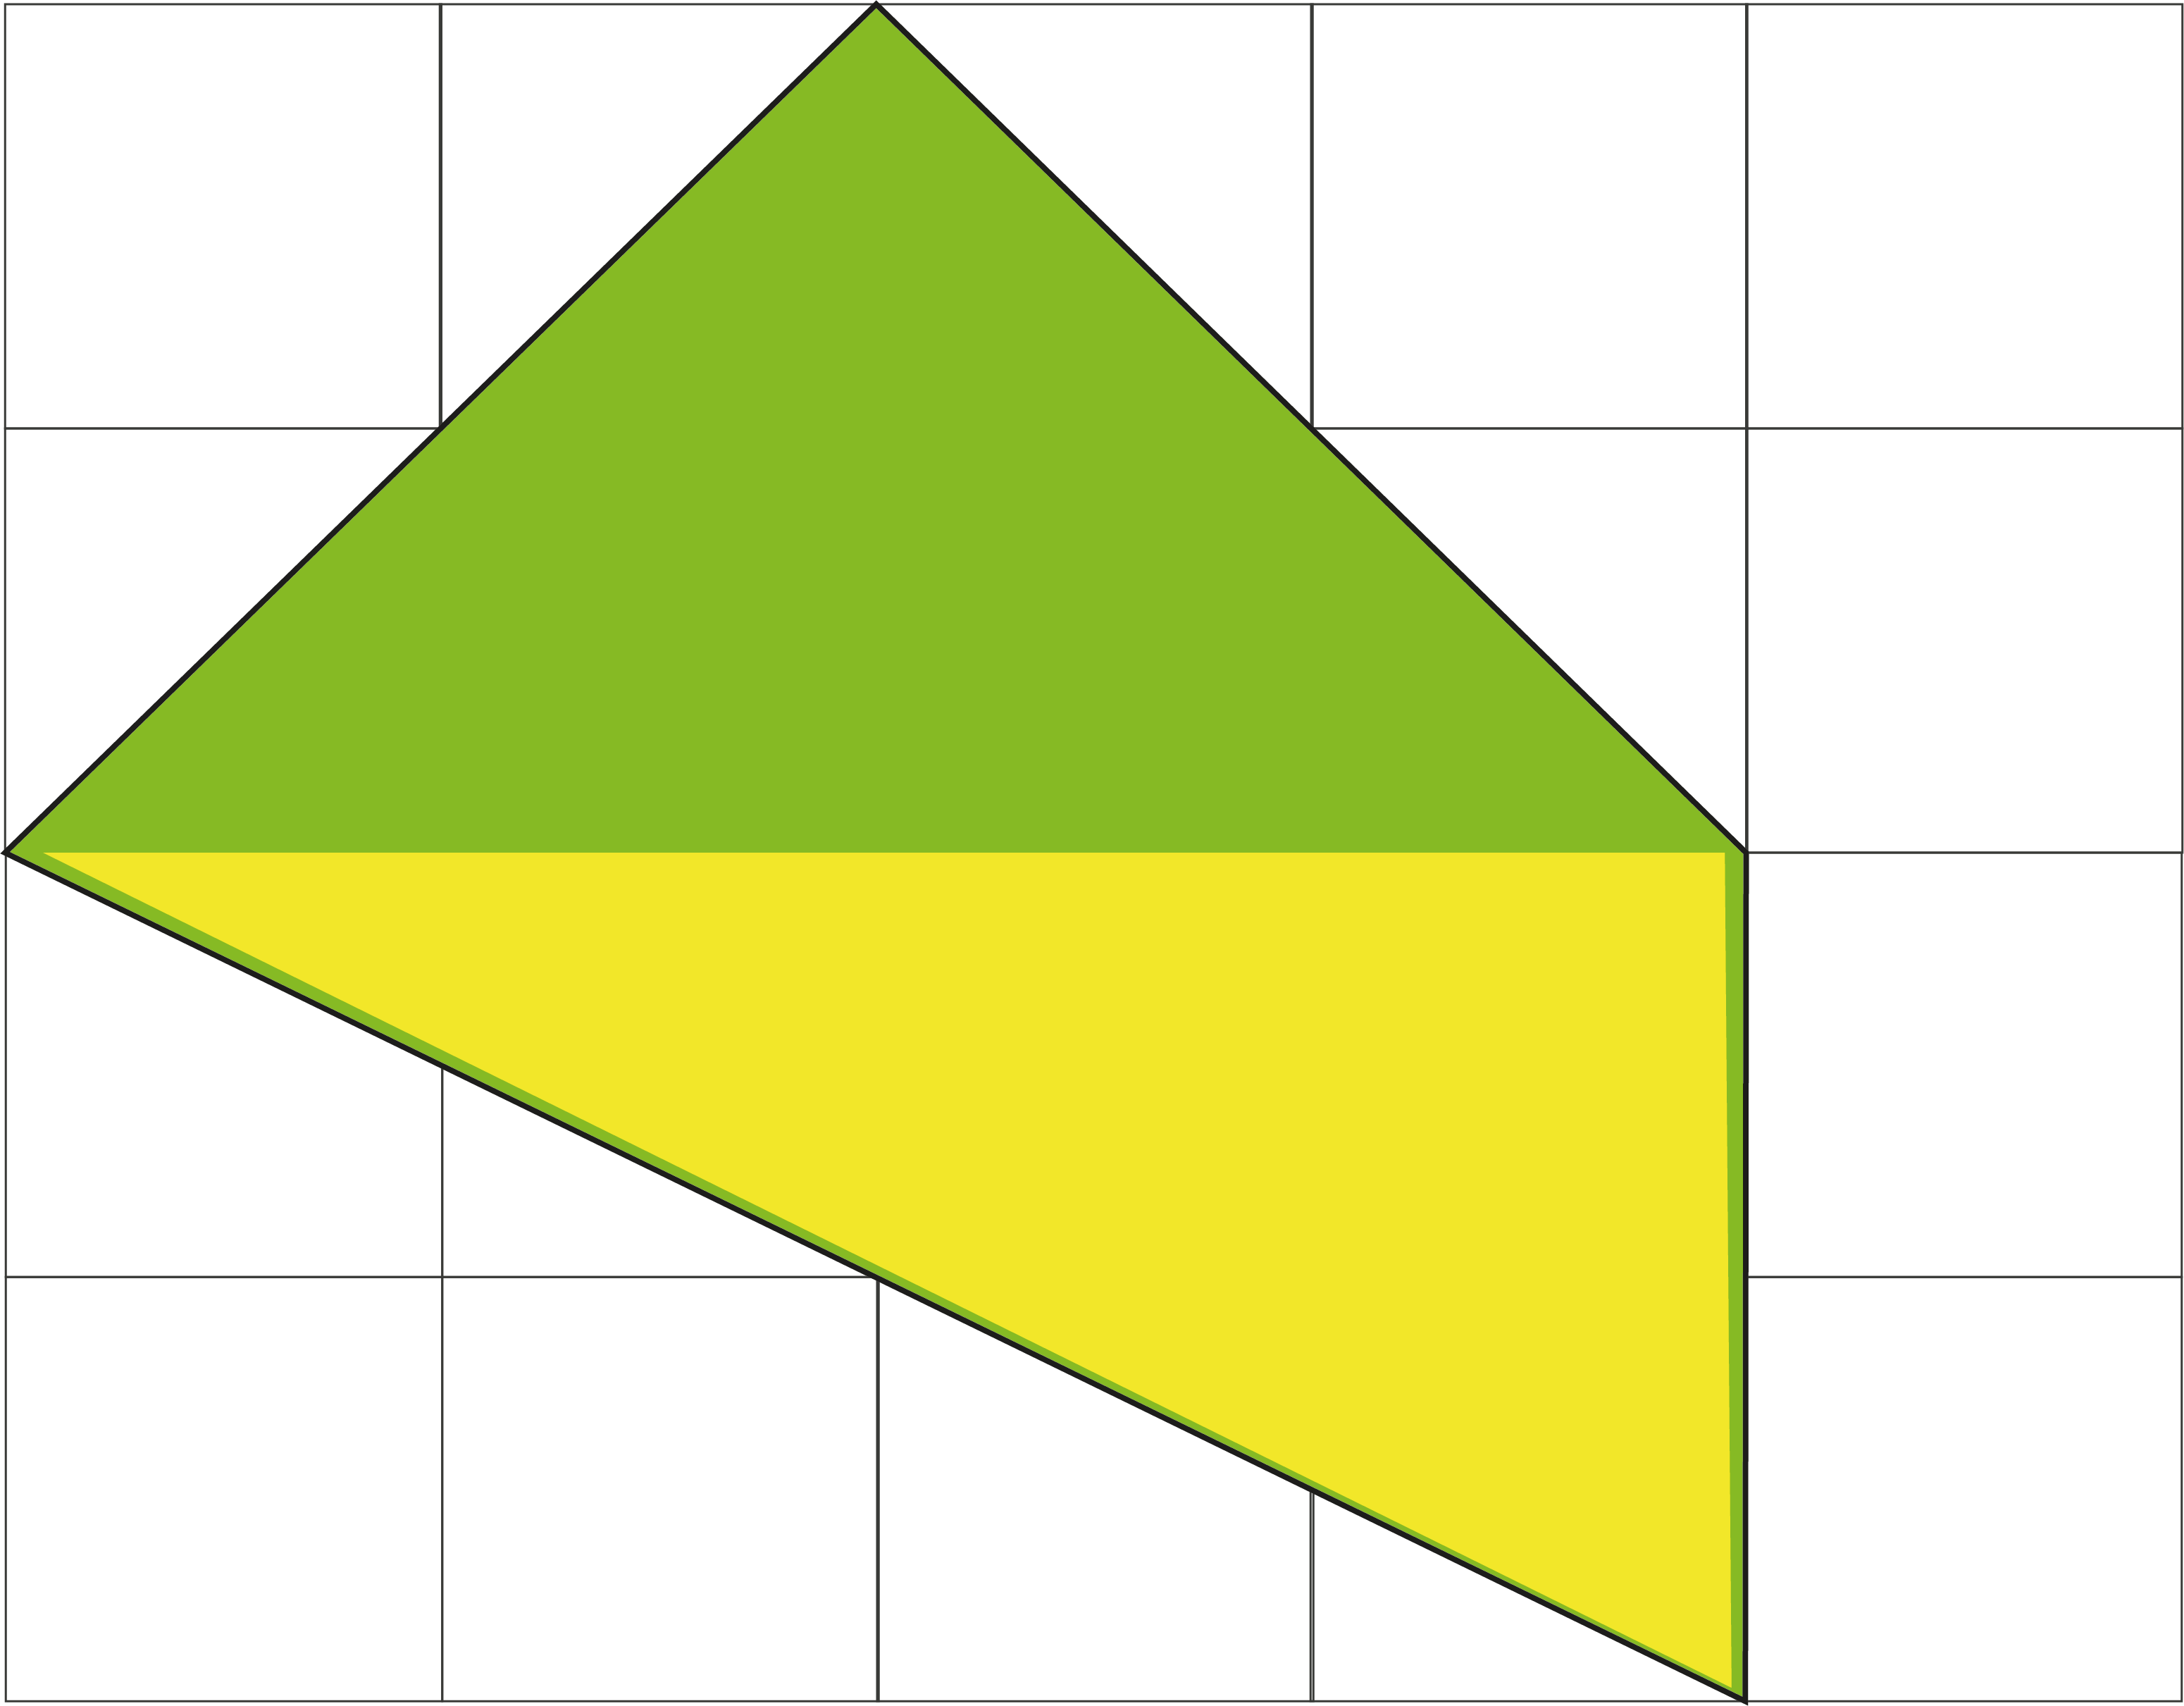 The green area is 4 square cm and the yellow area is 6 square cm